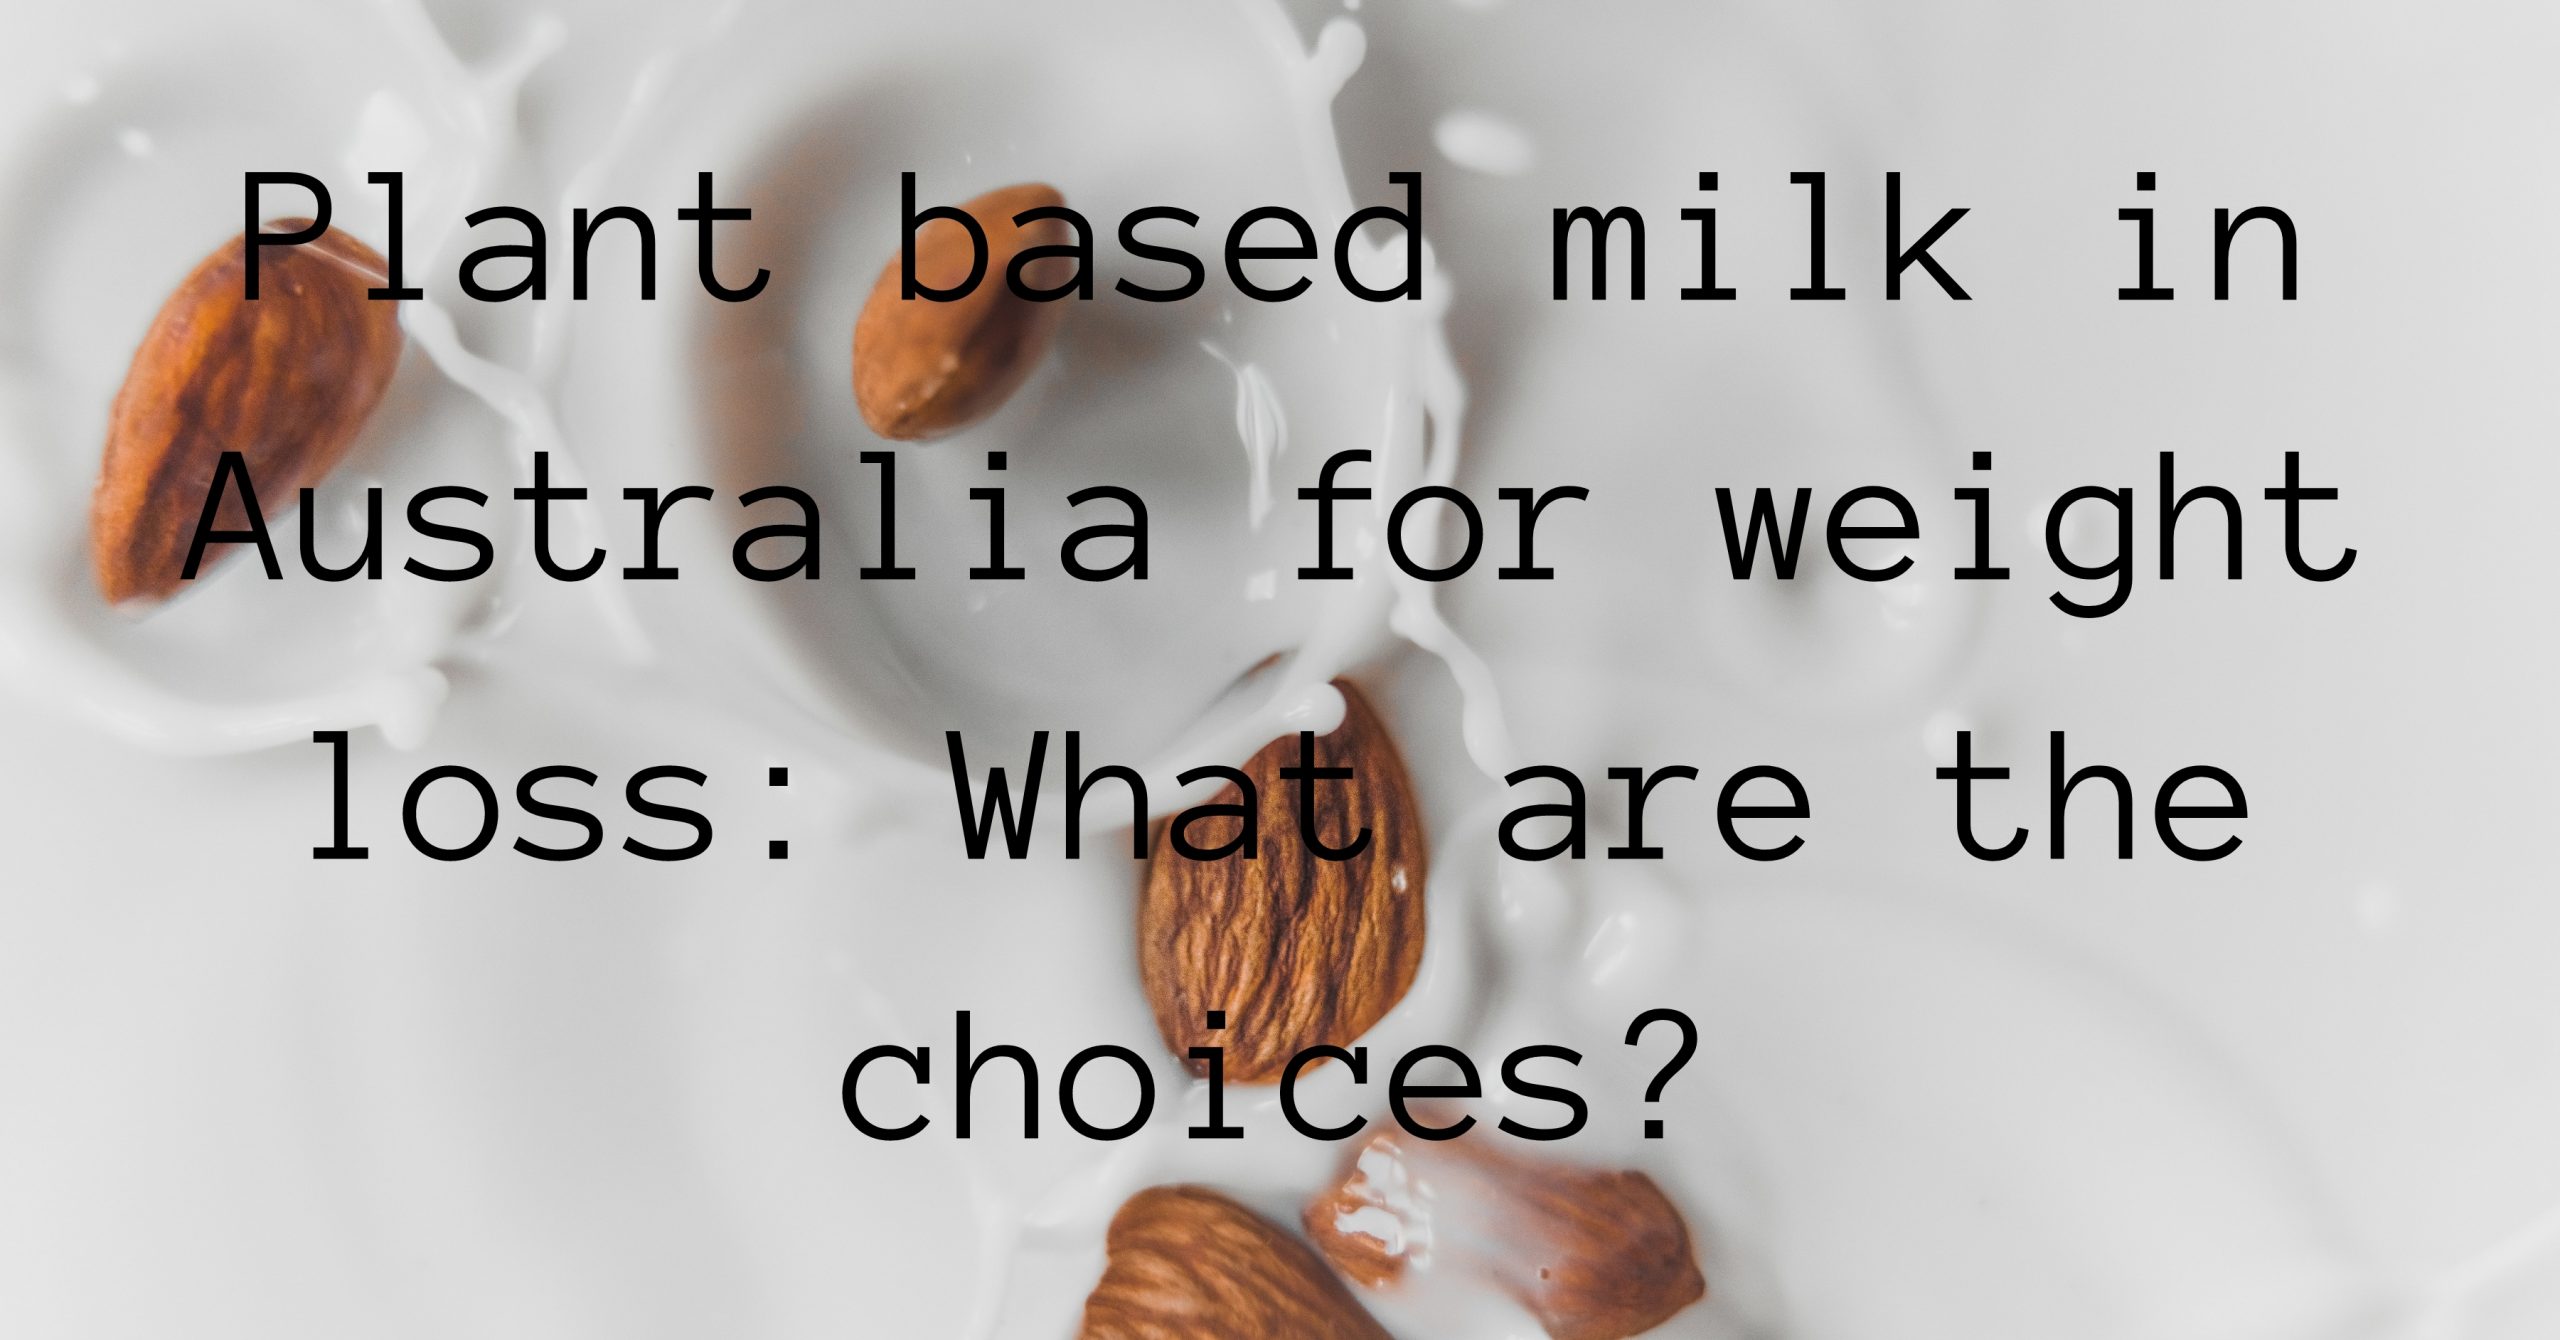 Plant based milk in Australia for weight loss